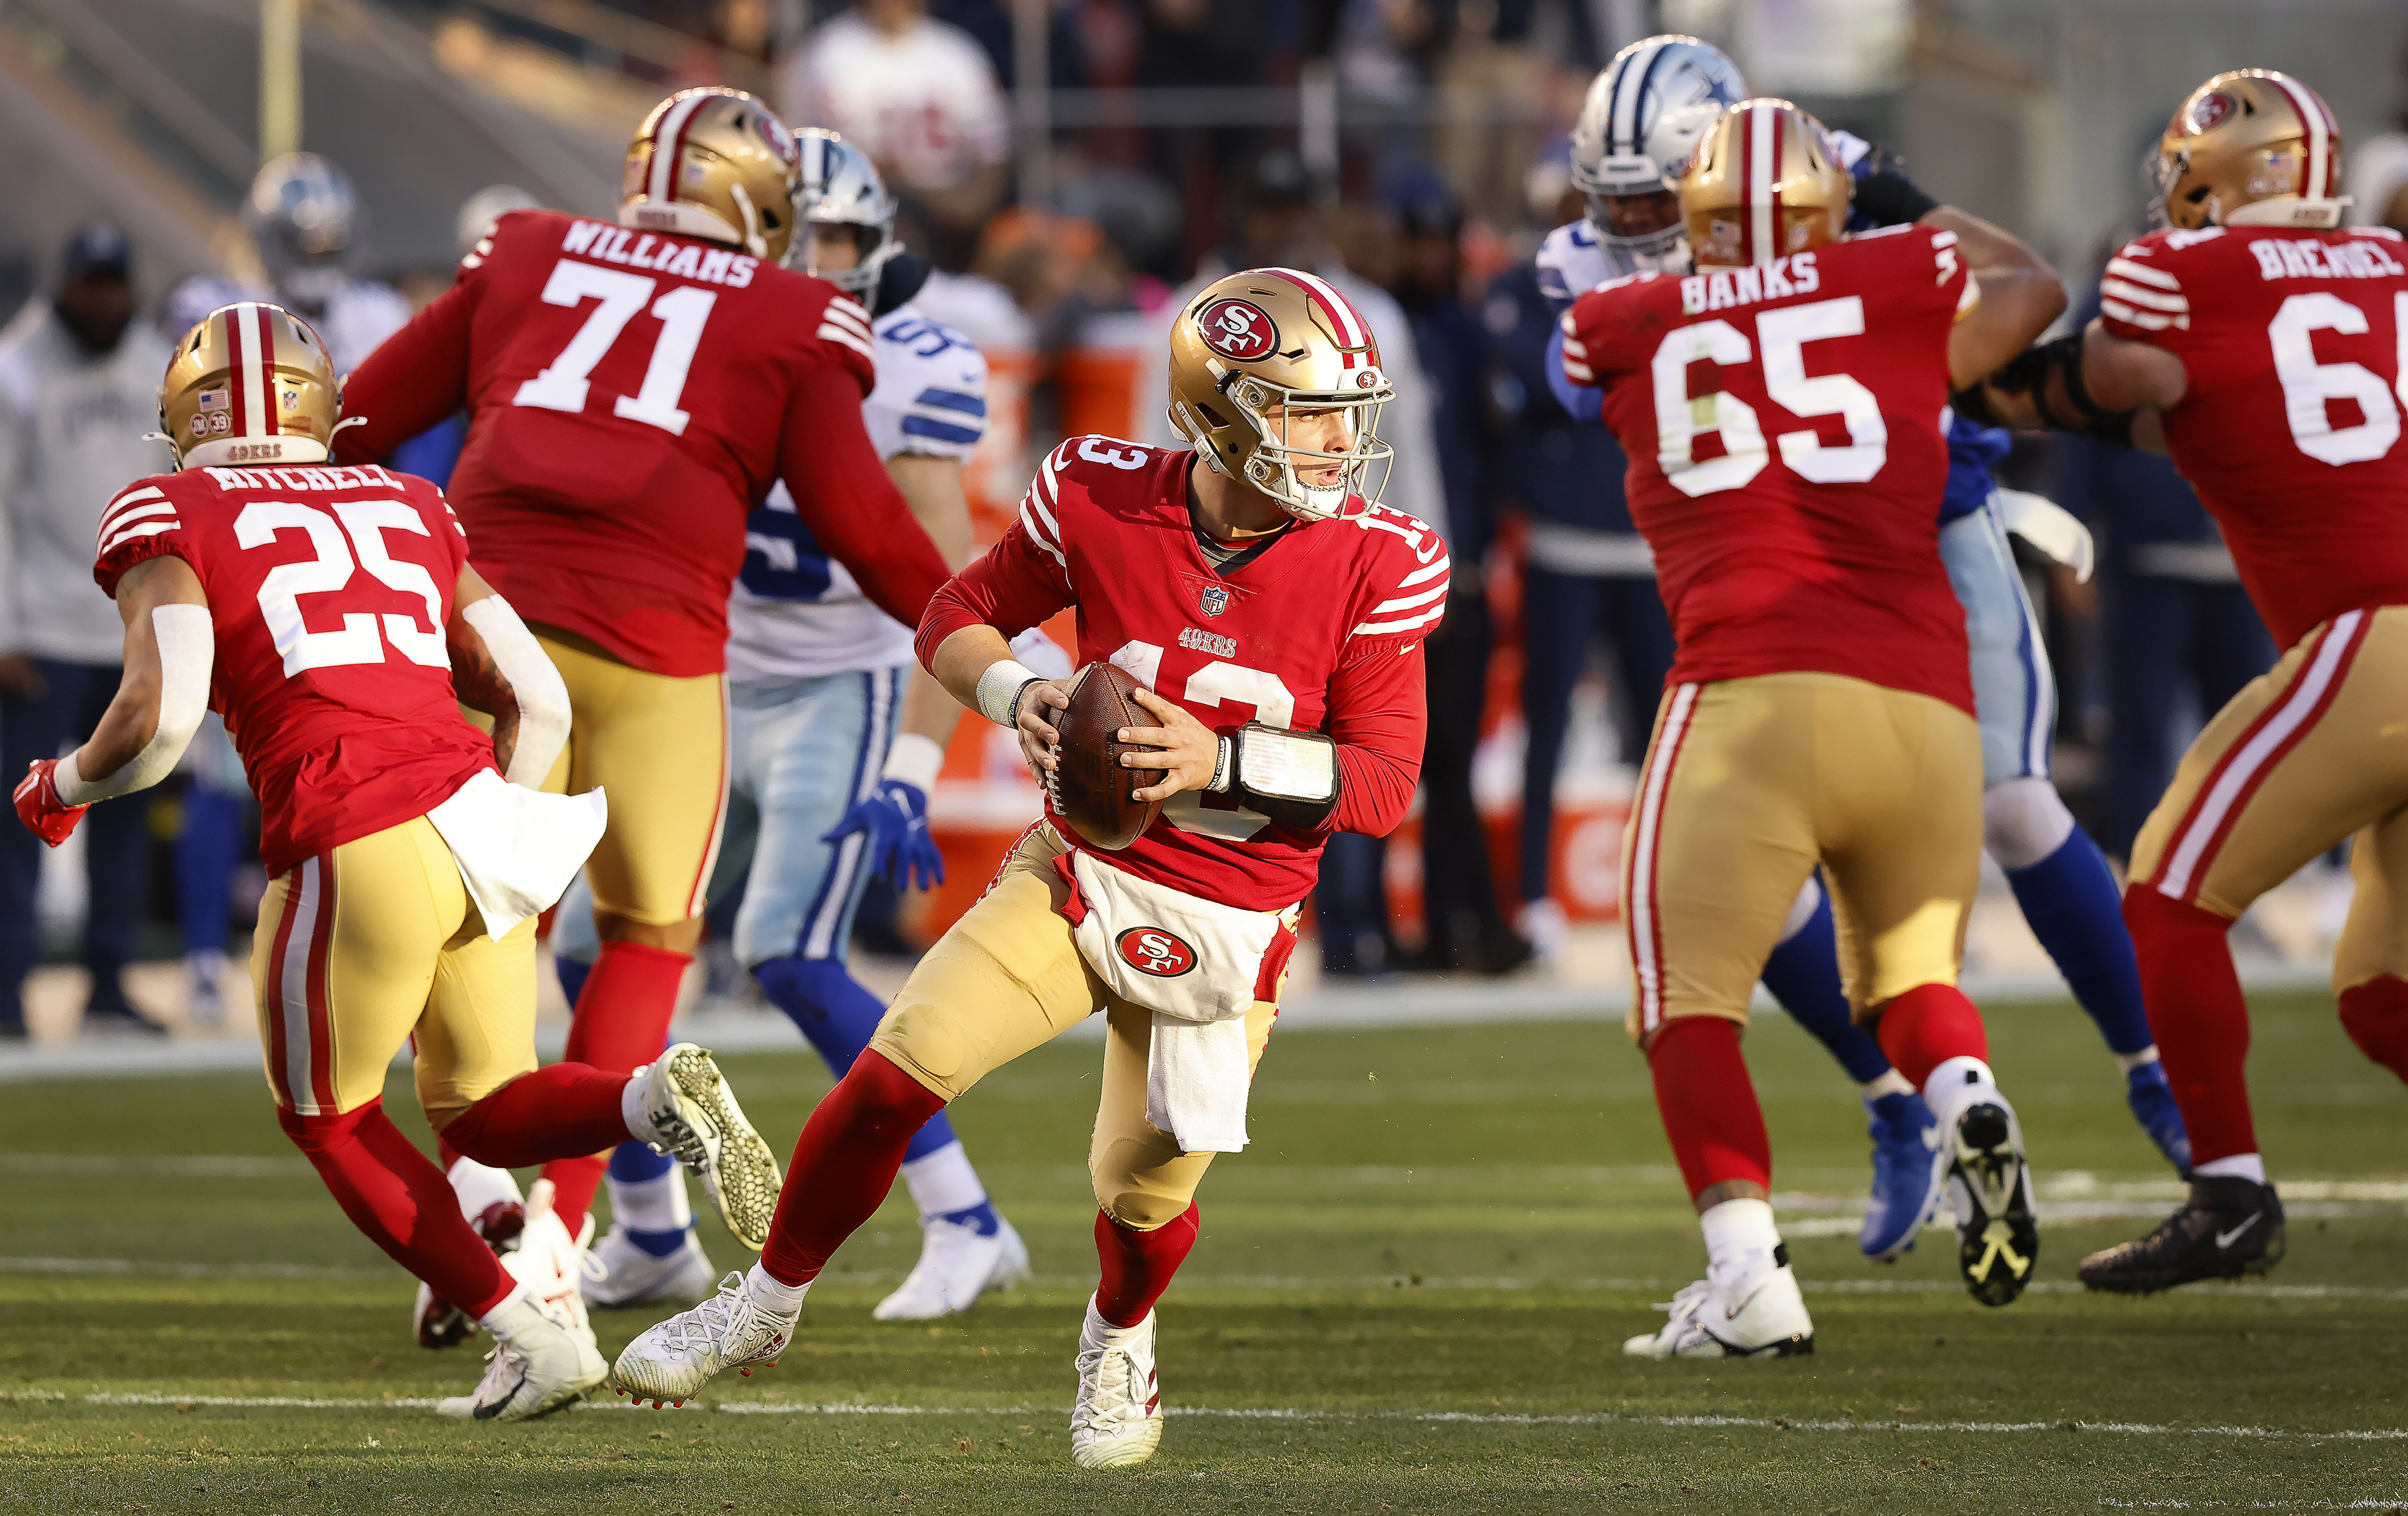 Cowboys want revenge on the 49ers over their elimination in last